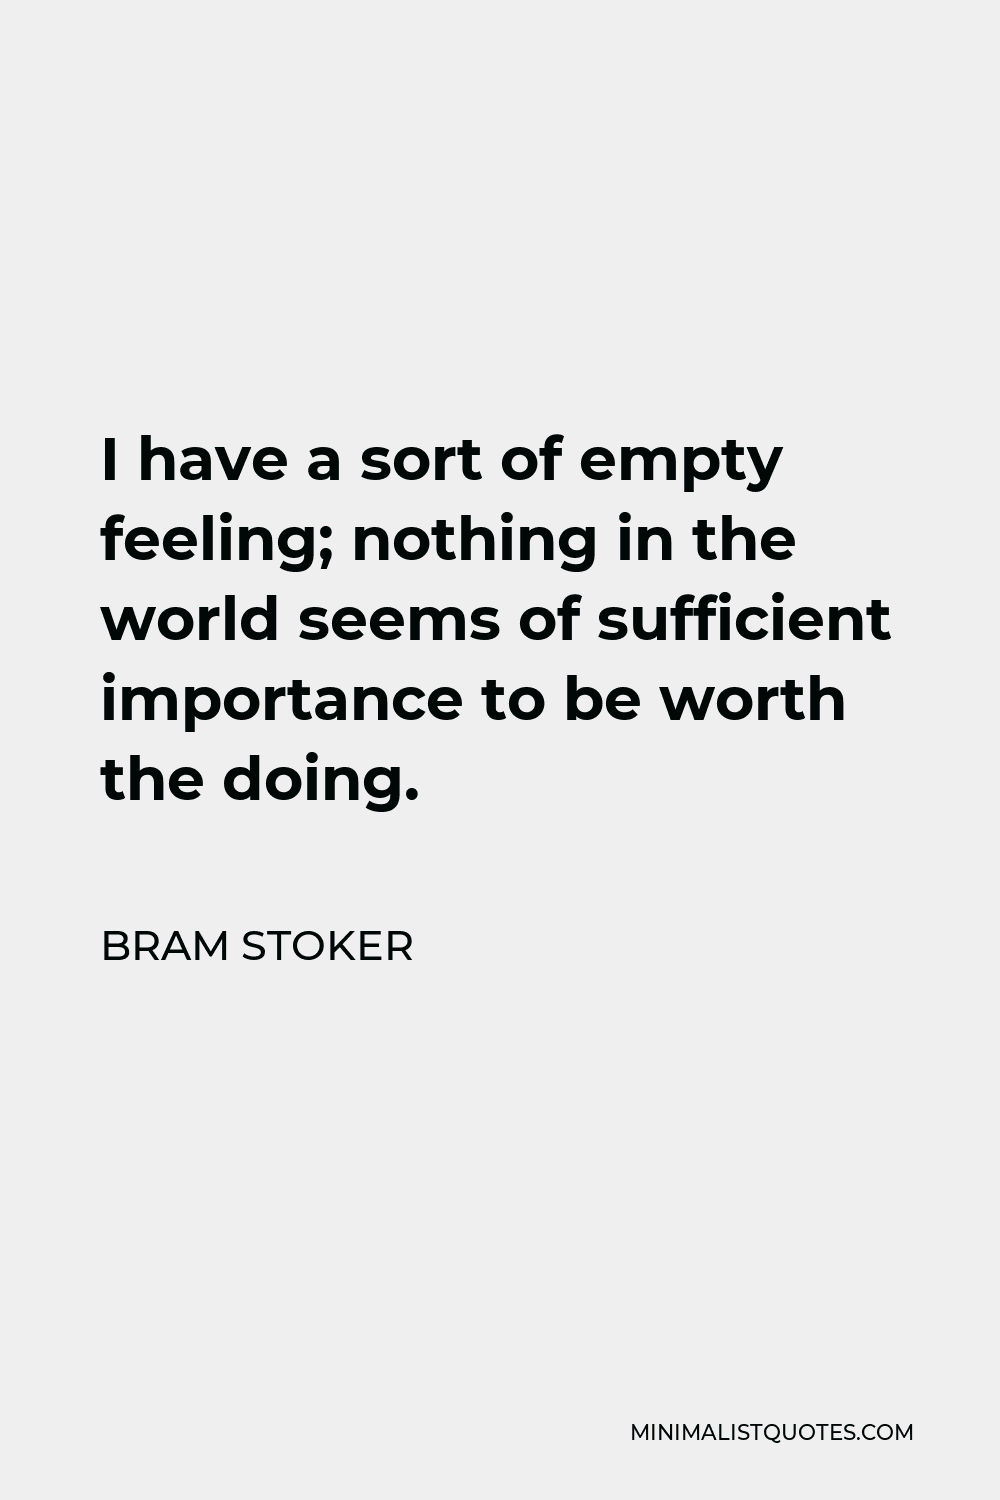 Bram Stoker Quote: I have a sort of empty feeling; nothing in the world ...